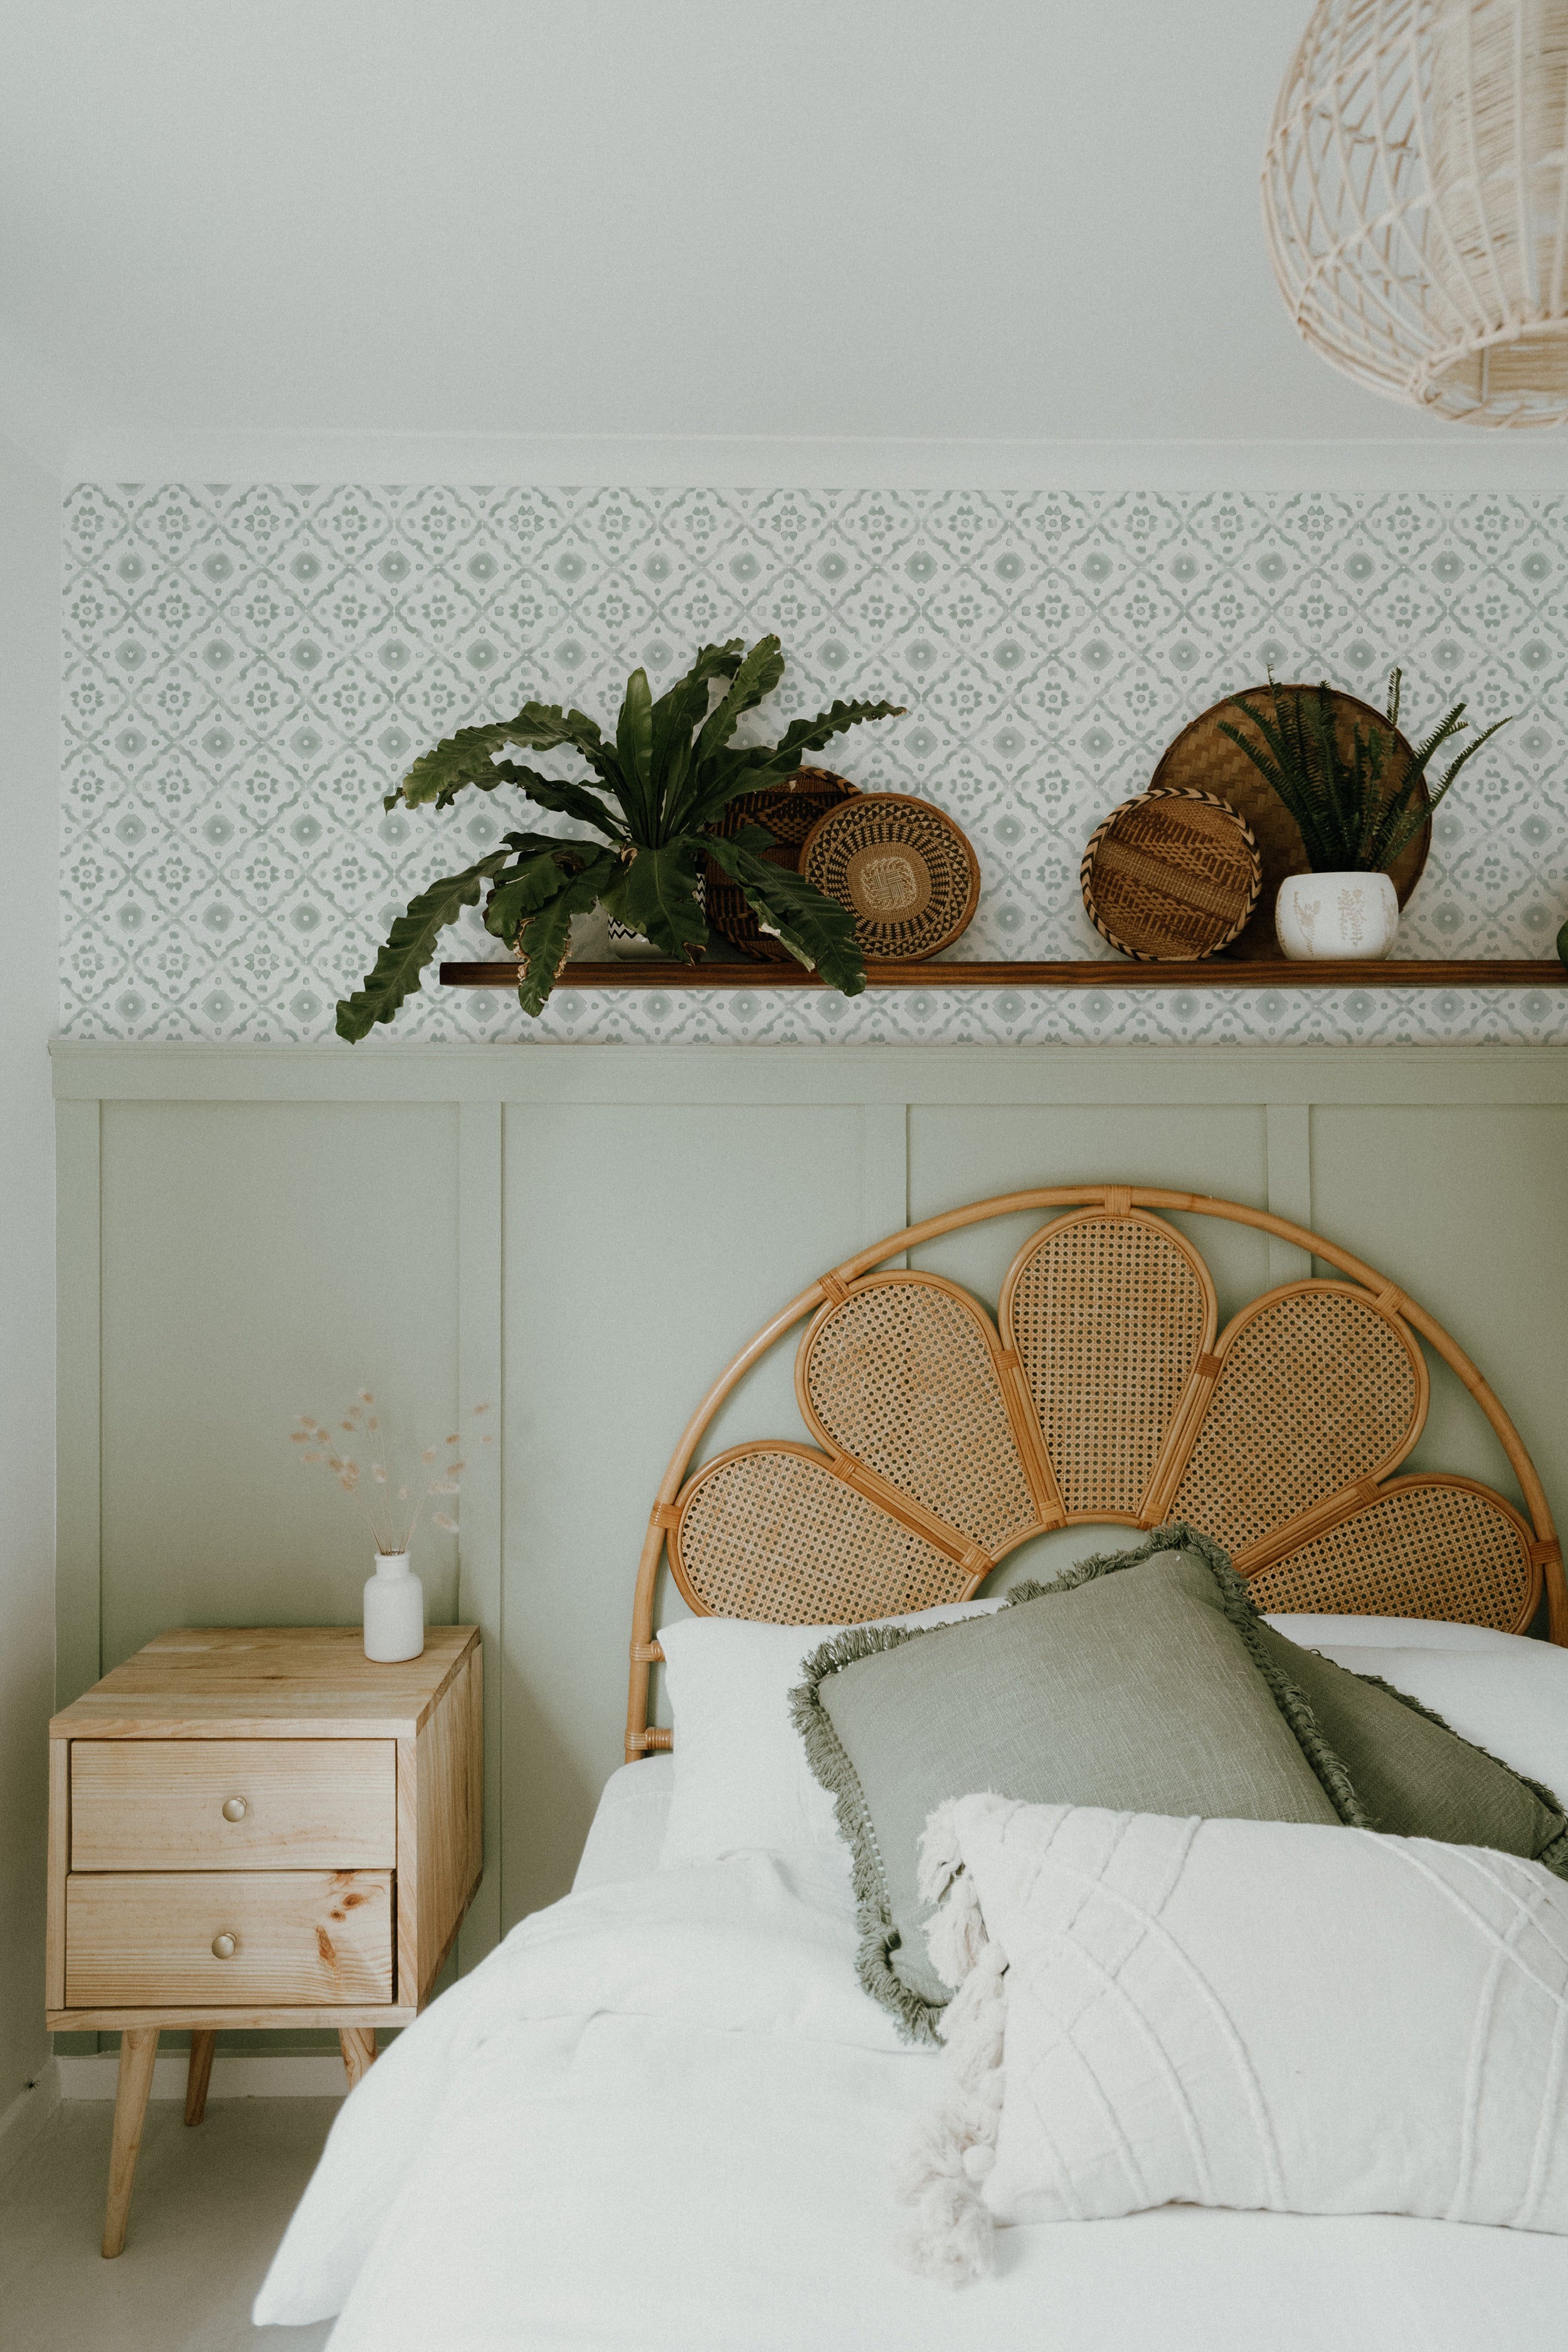 A stylish bedroom setting enhanced by the Euclid Wallpaper, featuring pale blue geometric flower patterns on a white backdrop. The room is complemented by a natural wicker headboard and matching decor items, creating a serene and inviting atmosphere.